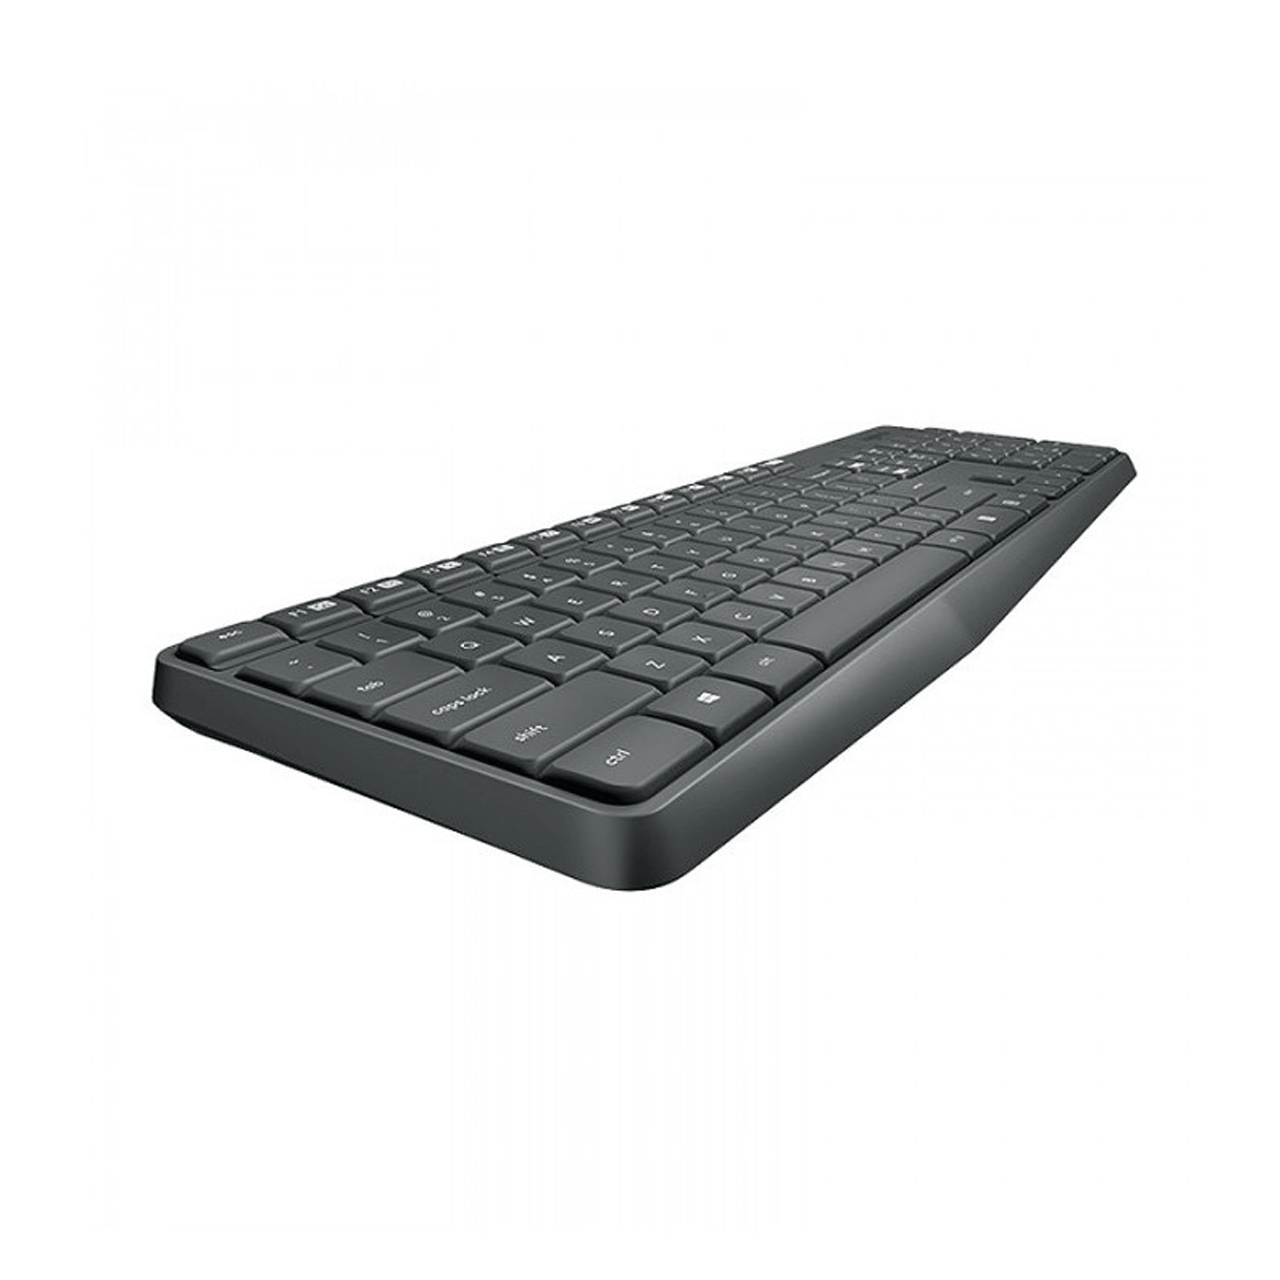 MK235-Wireless-Keyboard-and-Mouse